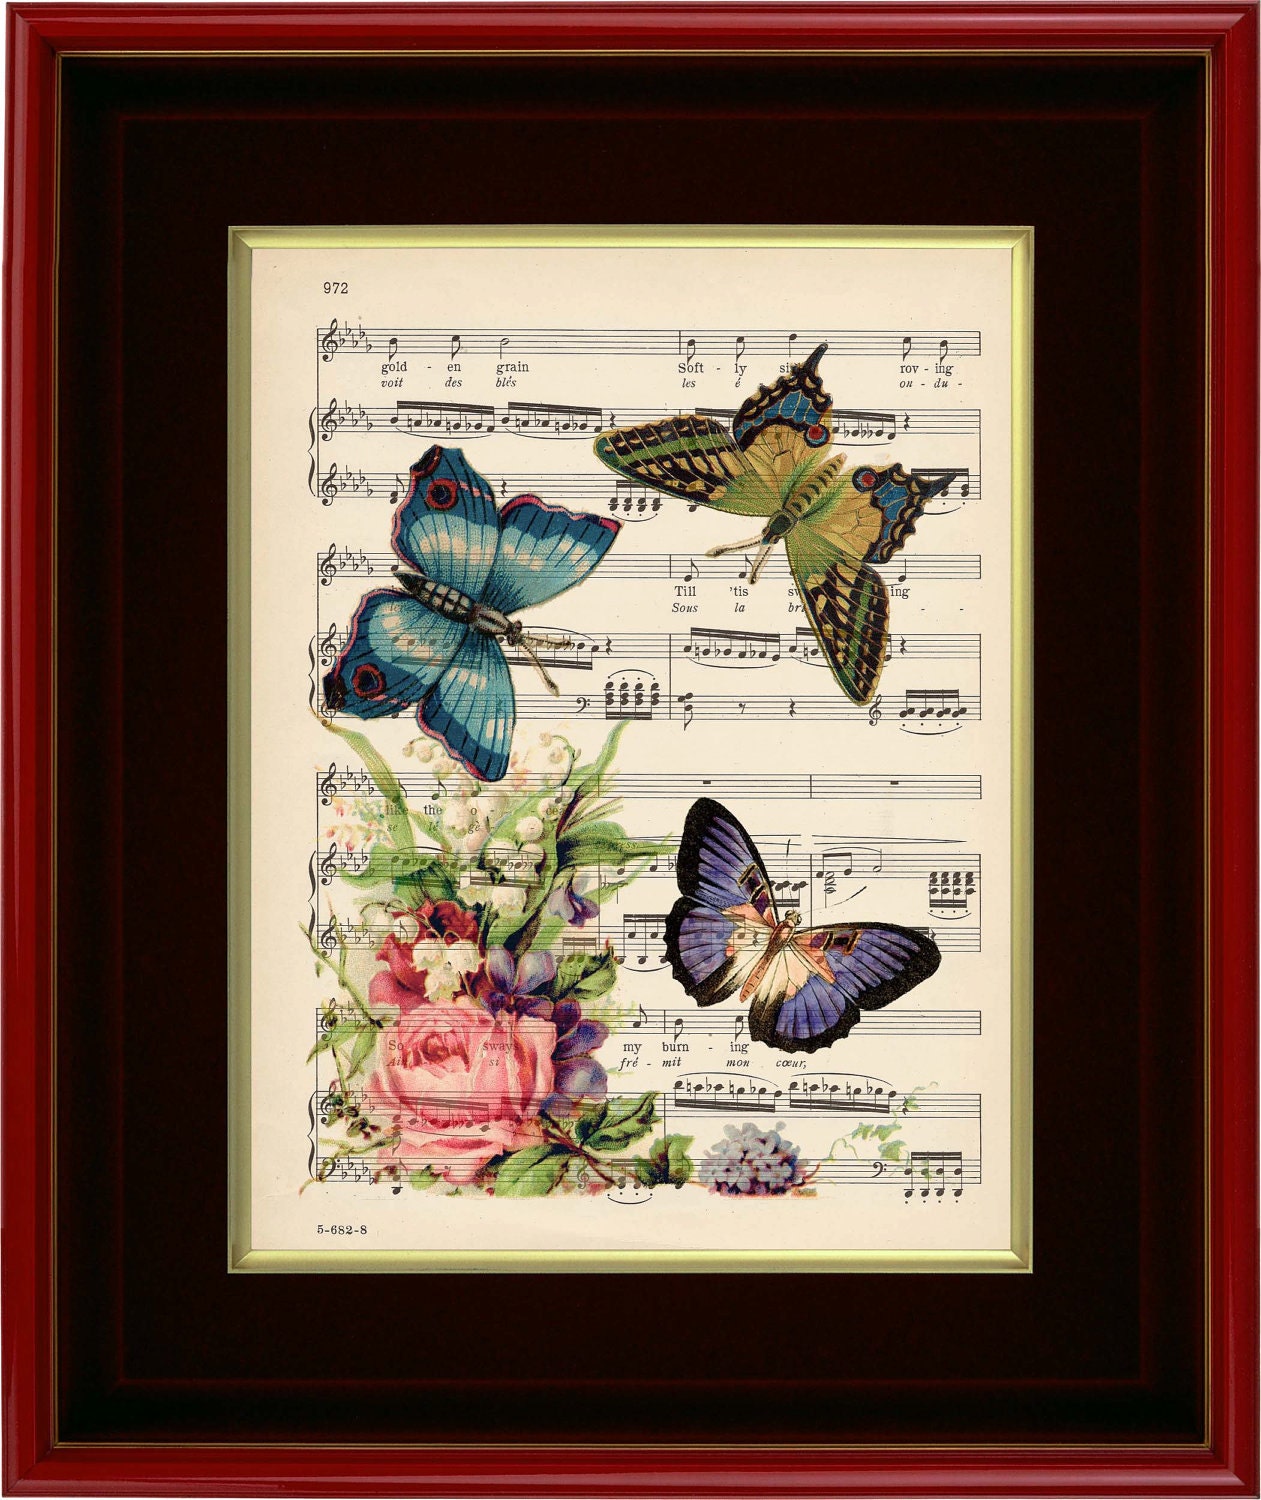 Floral And Butterflies - Art Print on 1920's Music Page - 8 1/2" x11"